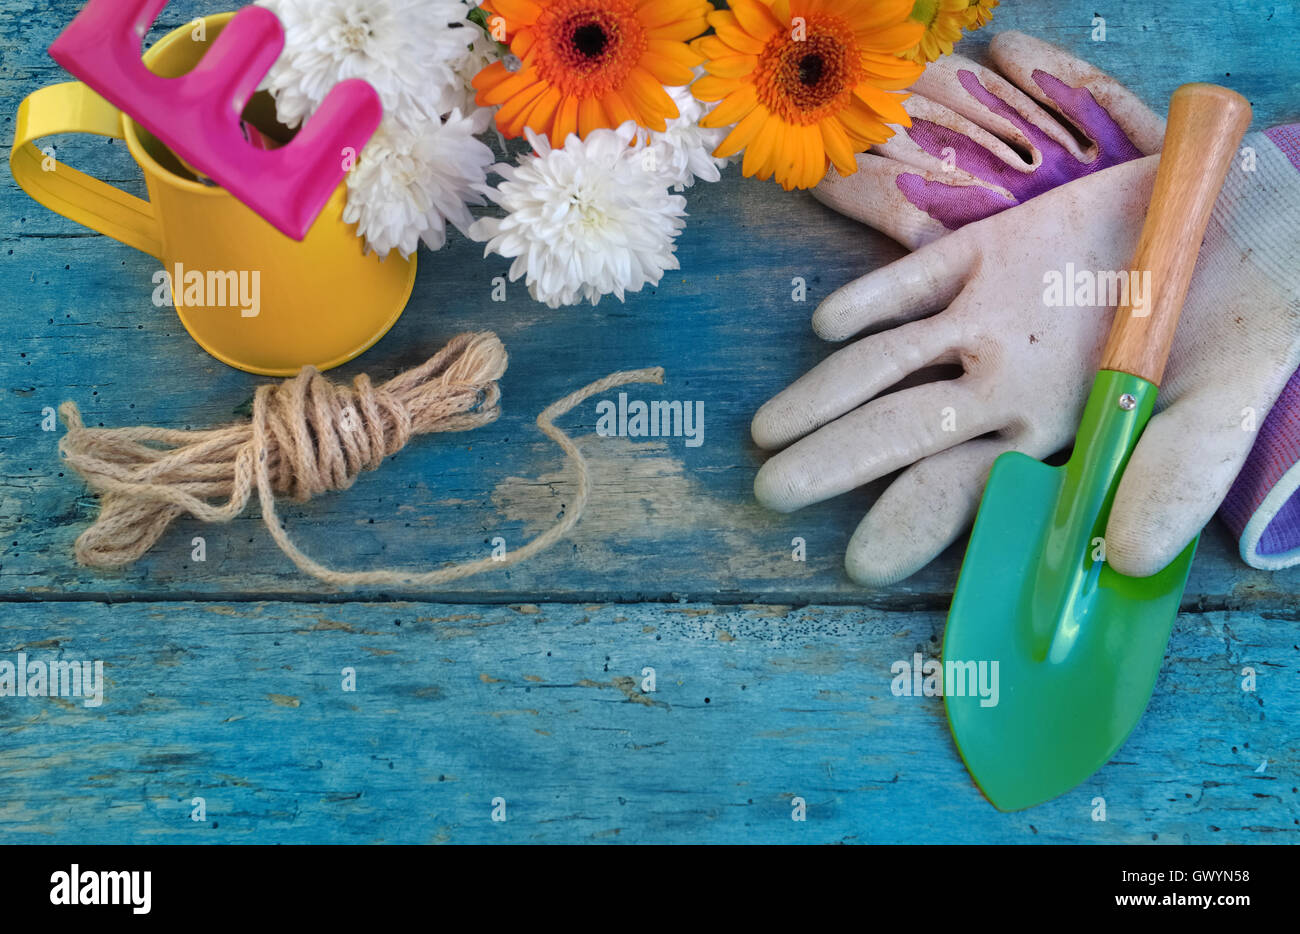 flowers and colorful gardening tools blue plank background Stock Photo